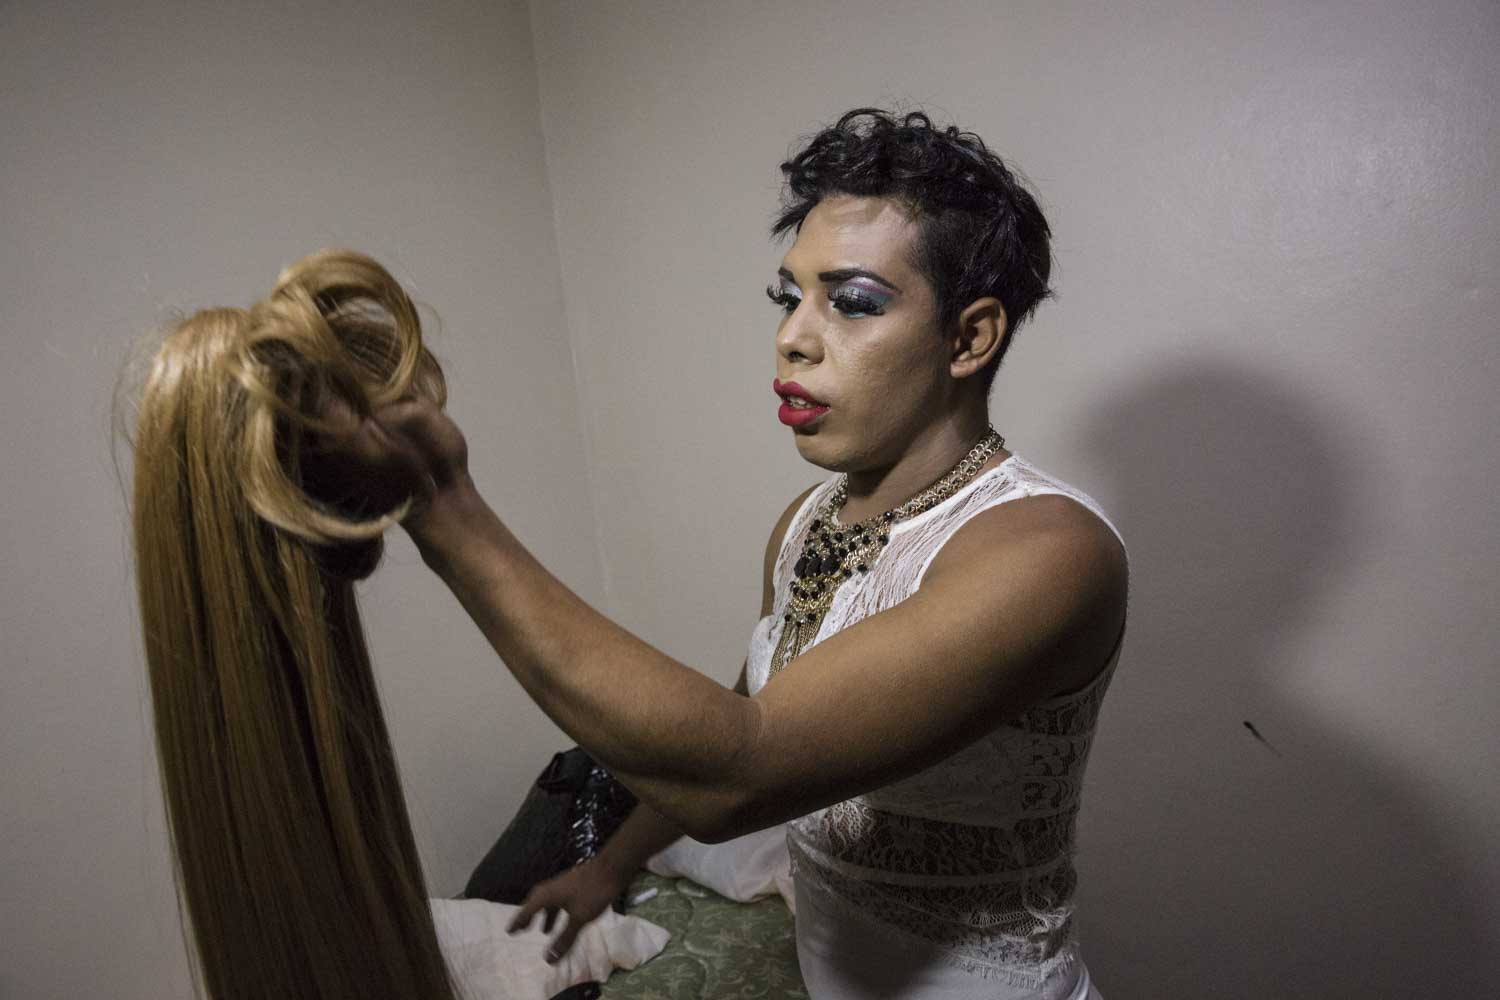  Darwin prepares  before a beauty contest for LGBT people.  